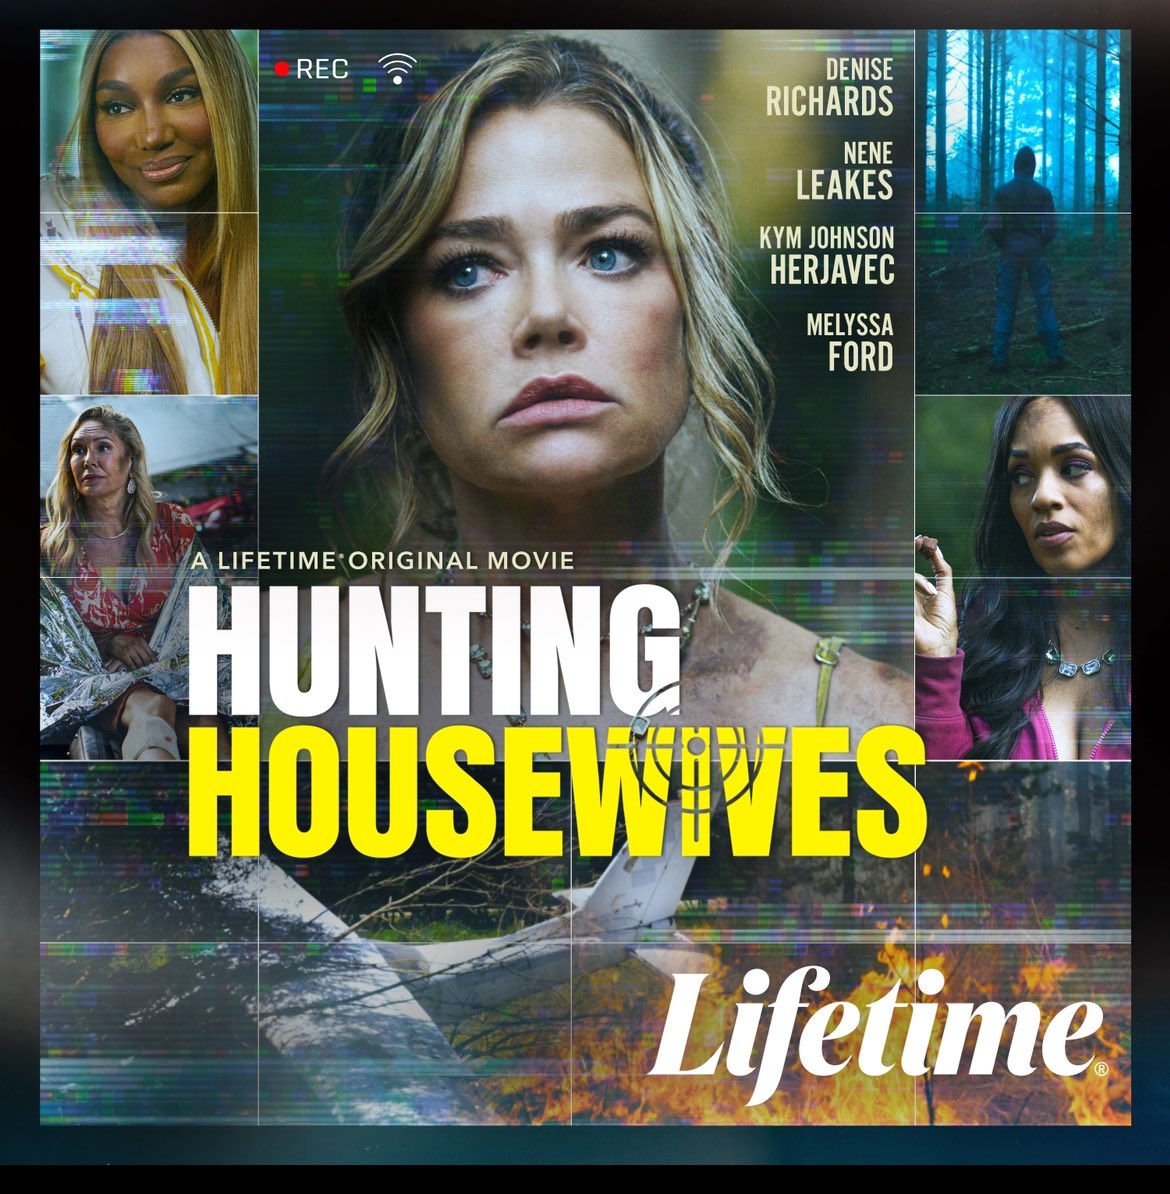 It’s FINALLY HERE! The premiere of #huntinghousewives on @lifetimetv ☺️☺️☺️☺️ tonite at 8pm ET/7pm CT!!!! I’m in a movie, y’all!!!!! 🙌🏽🙌🏽🙌🏽 Hootie Hoooooooo!!!!